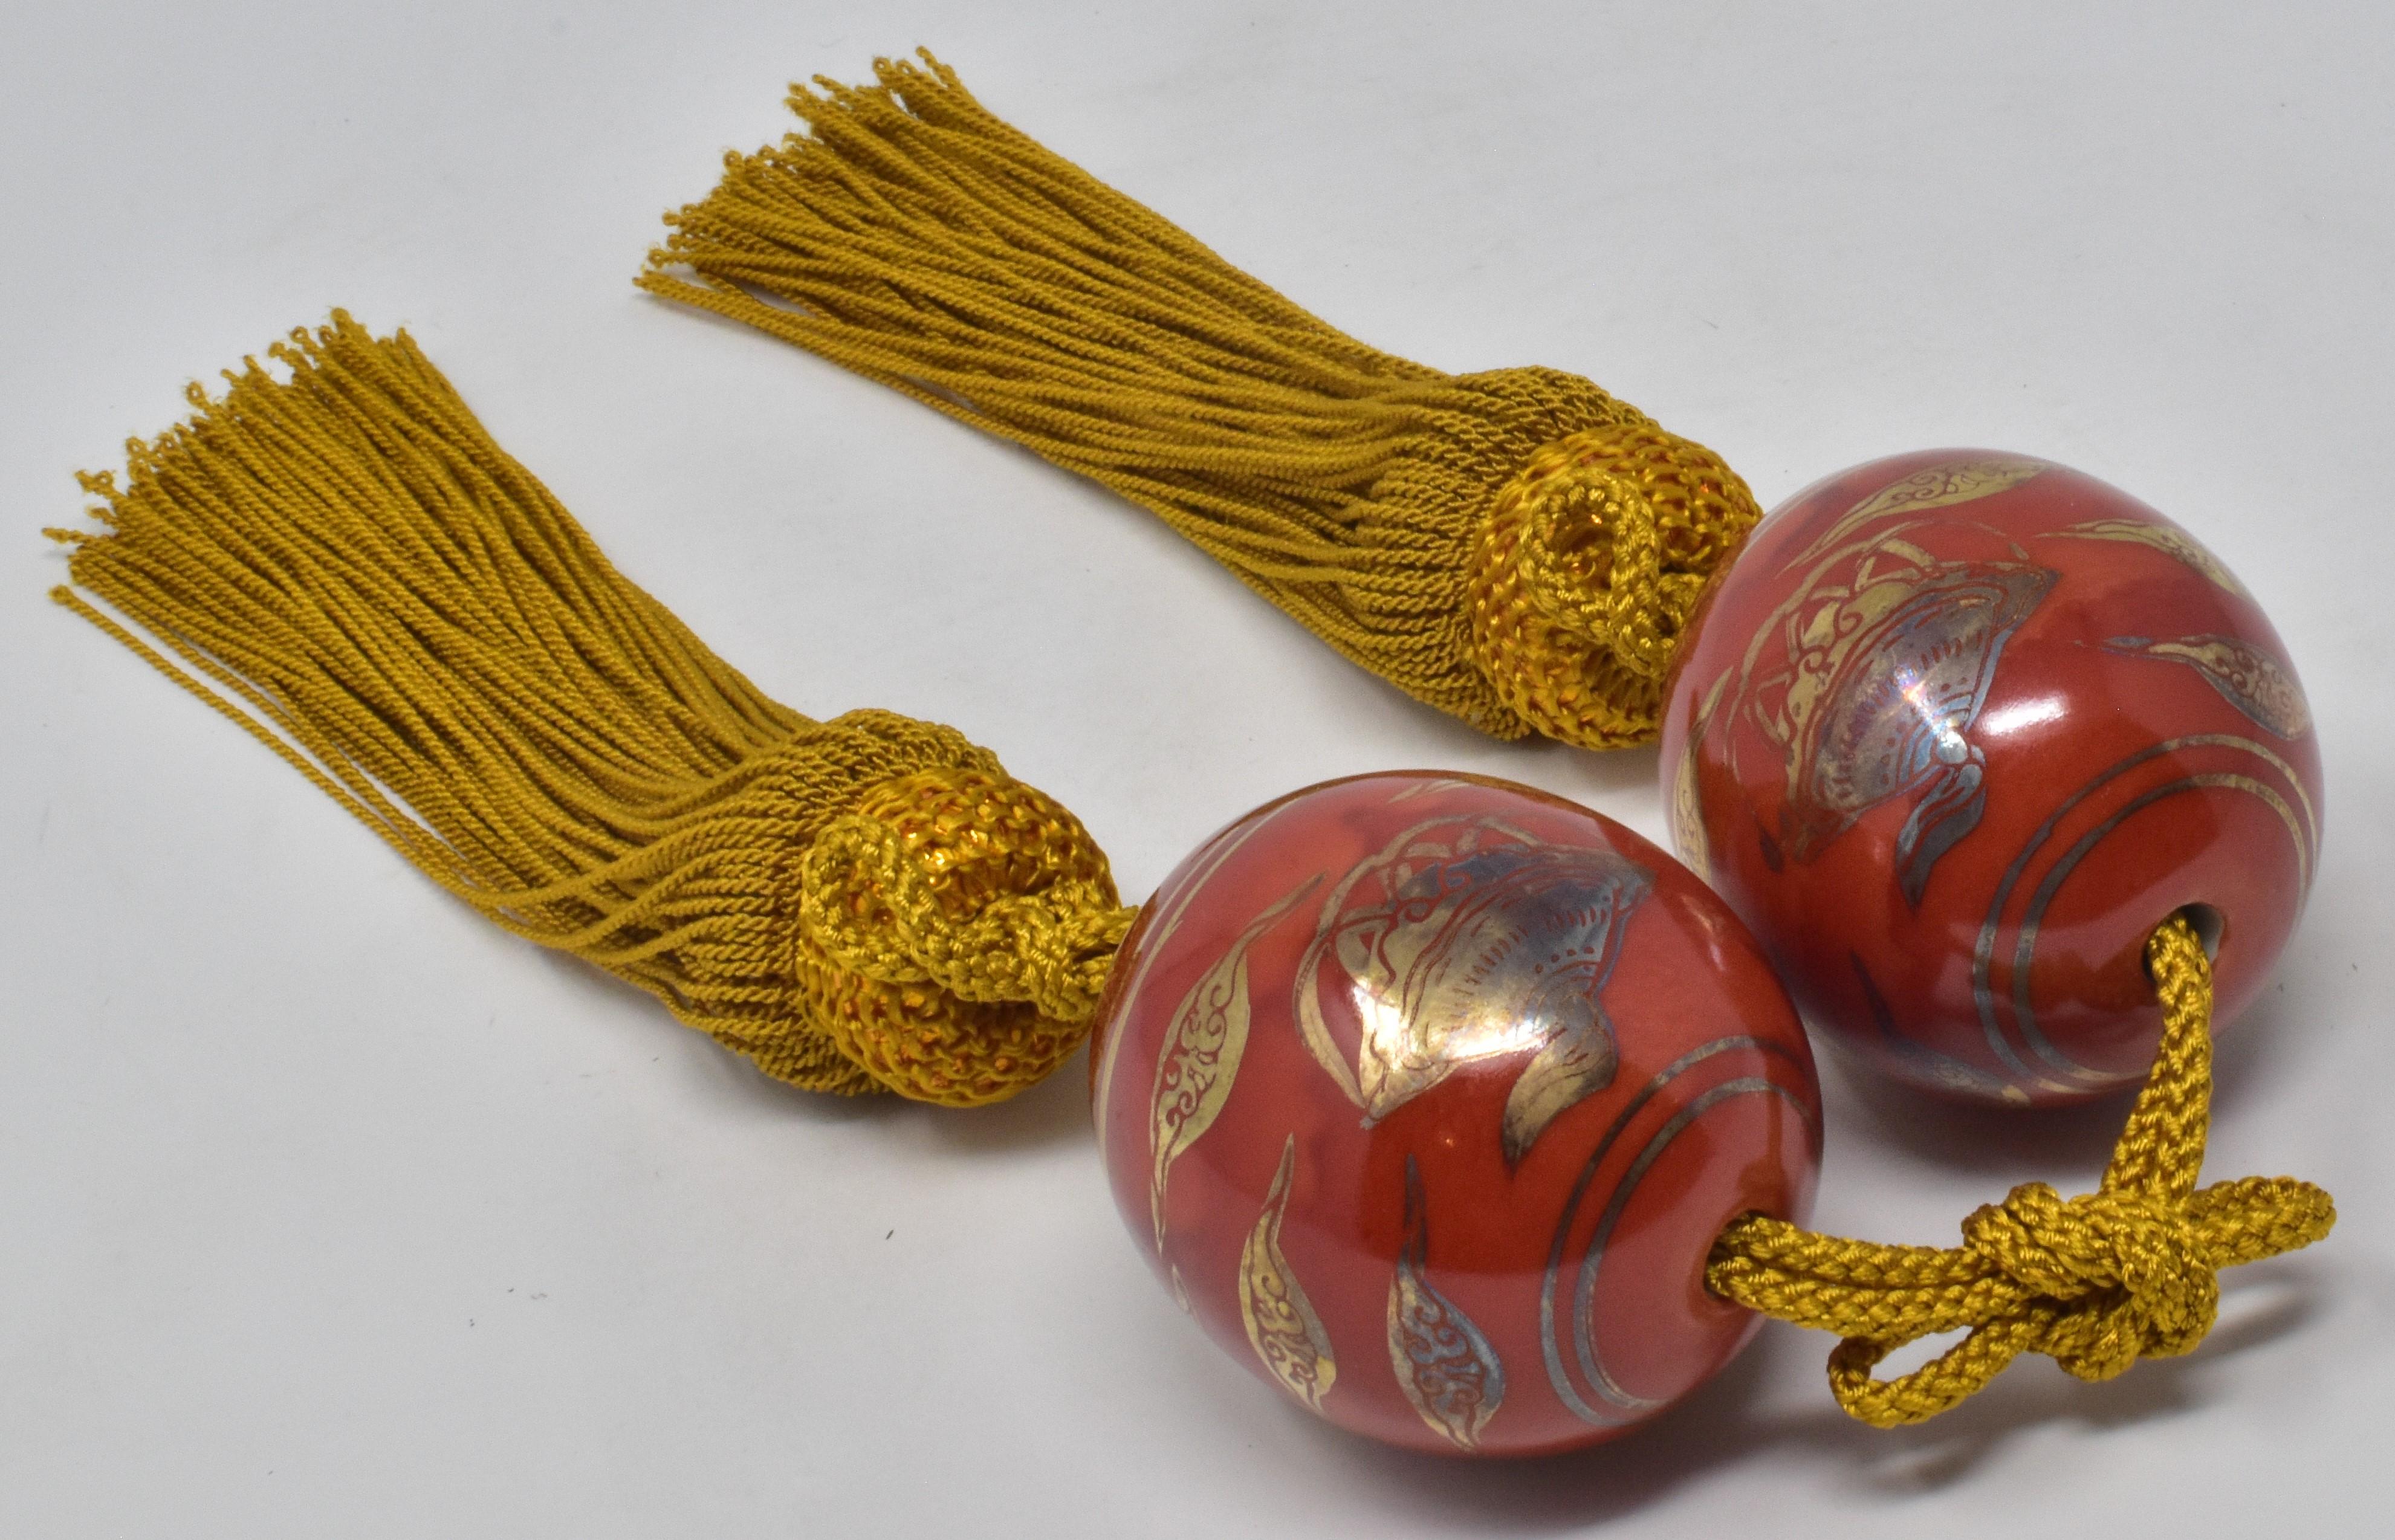 Pair of Japanese porcelain scroll weights (fuchin), intricately hand painted on a beautiful egg-shaped body in gold on an iron red background. This exquisite pair is from the Kutani region of Japan and each piece bears the mark of Kutani on the